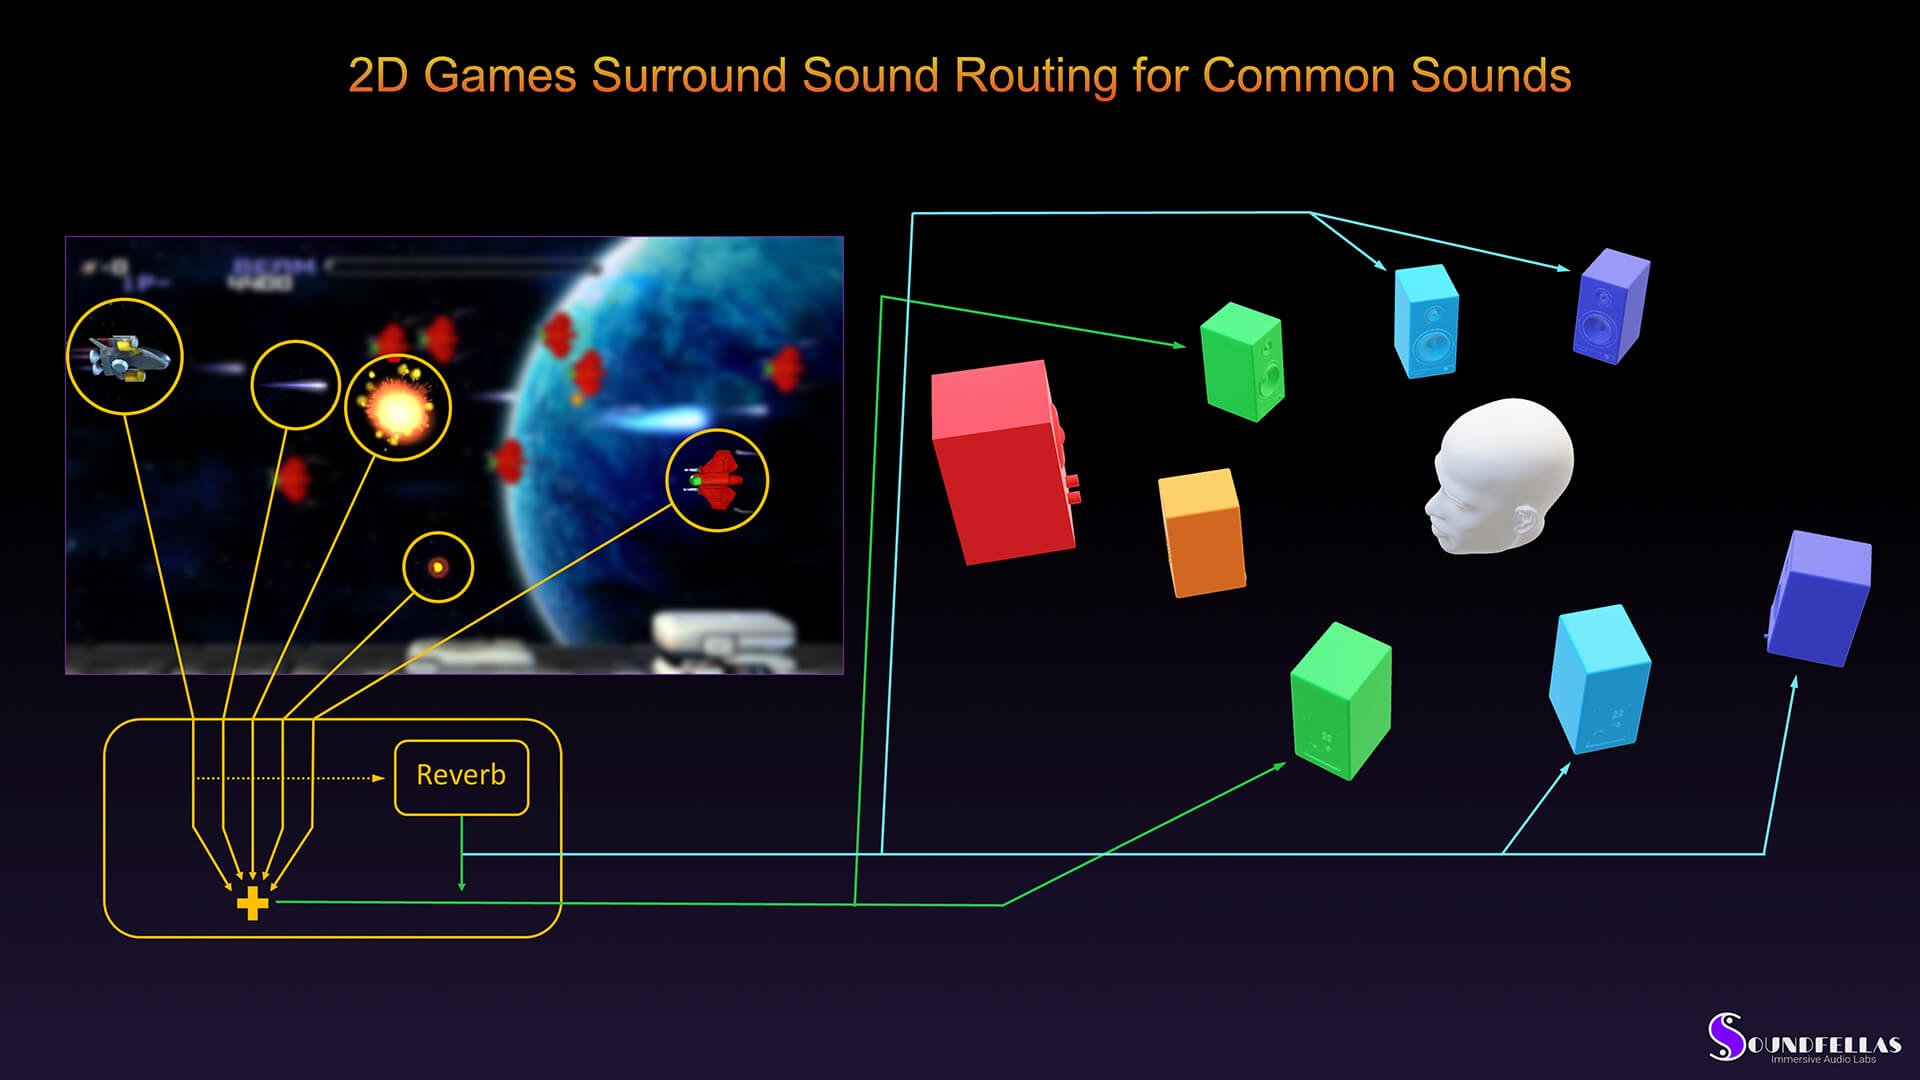 Image of 2D game surround sound routing for common sounds.